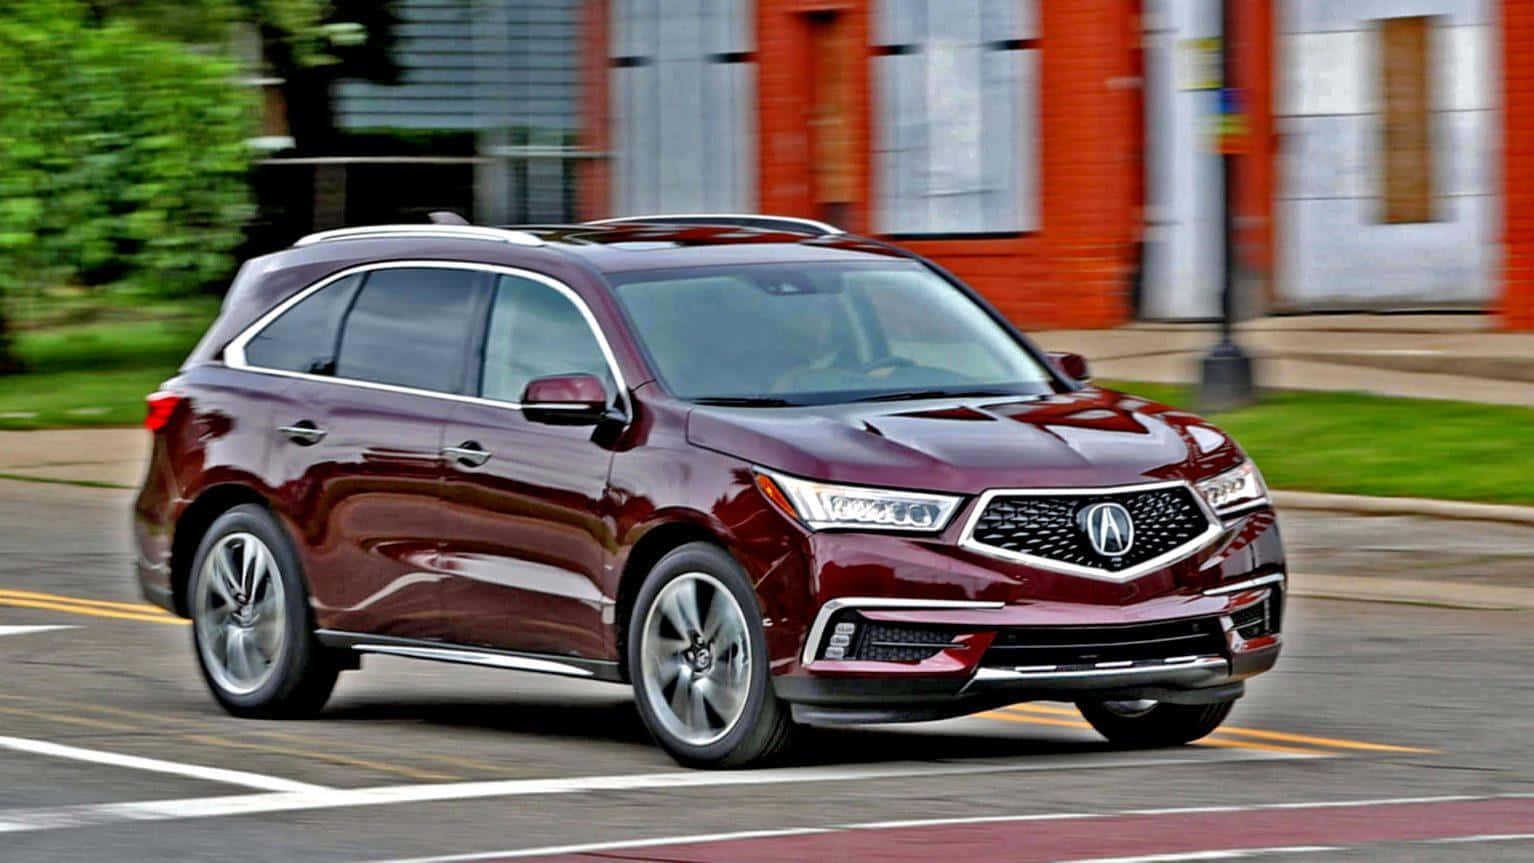 Acura MDX Luxury SUV Cruising on a Picturesque Landscape Wallpaper